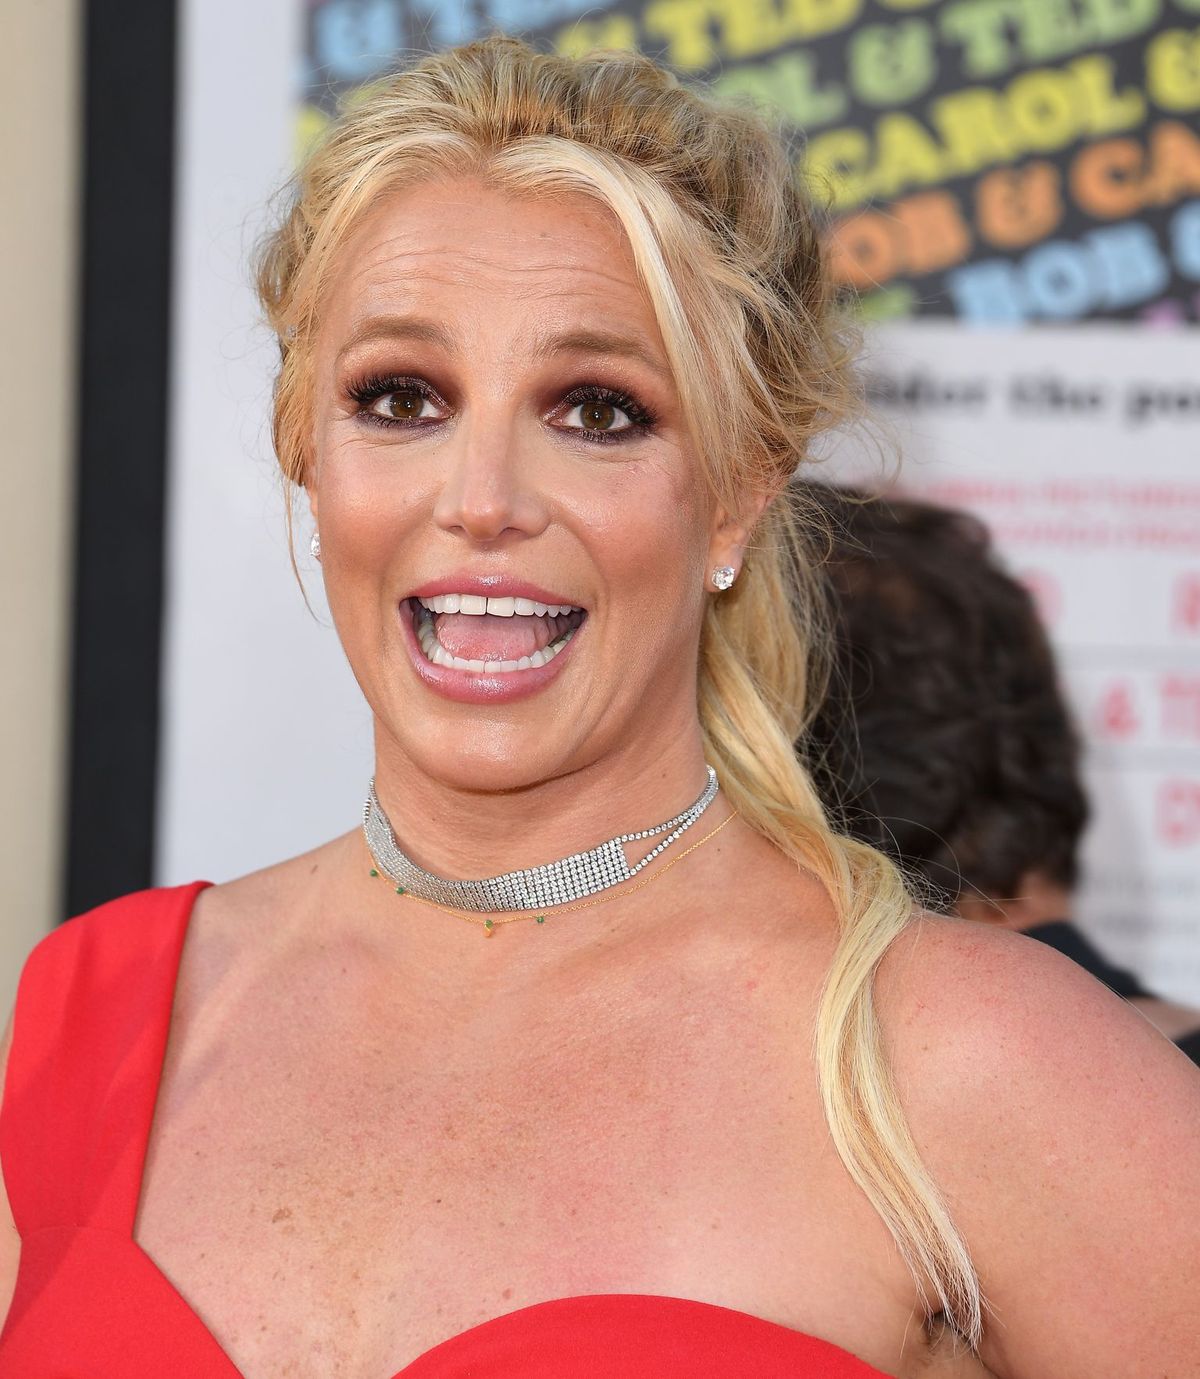 Britney Spears arrives at the Sony Pictures' "Once Upon A Time...In Hollywood" Los Angeles Premiere on July 22, 2019, in Hollywood, California | Photo: Steve Granitz/WireImage/Getty Images